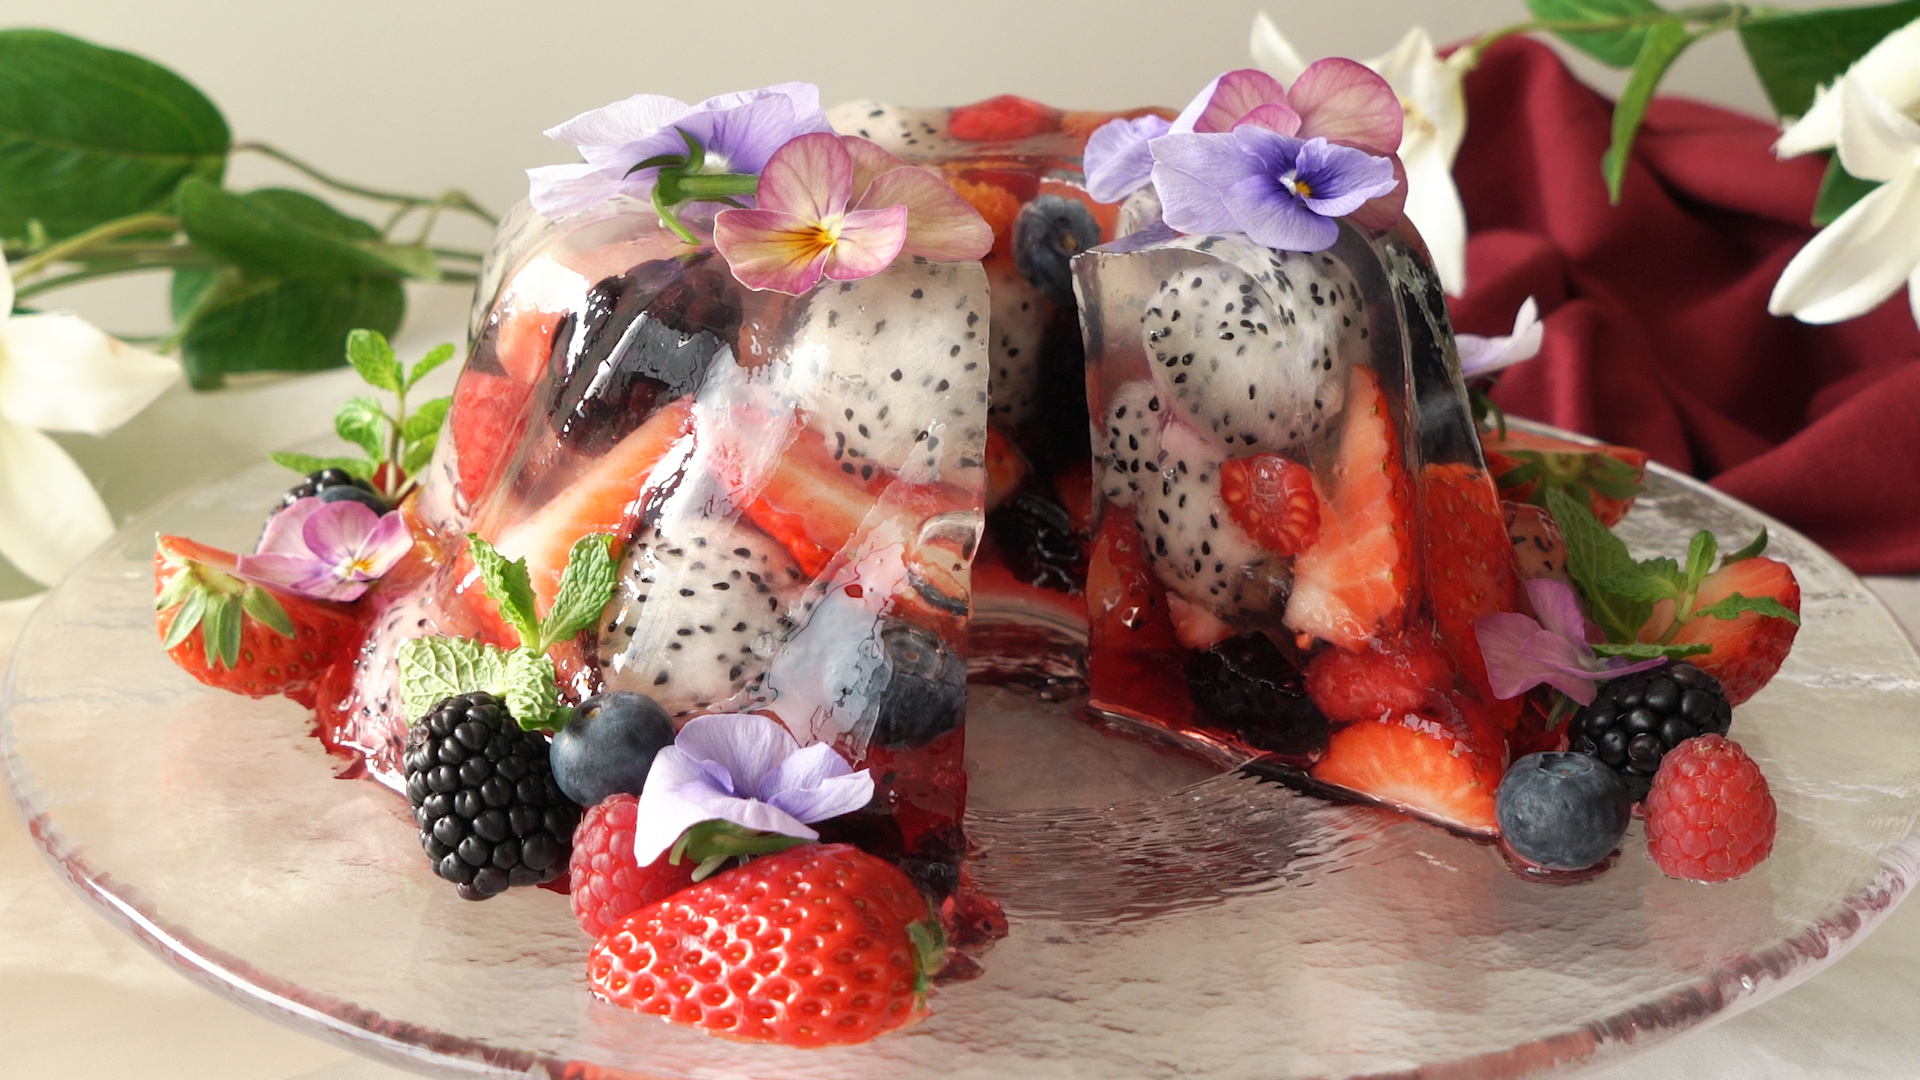 Berry and dragon fruit jelly, Exotic dessert, Tastemade creation, Refreshing and tangy, 1920x1080 Full HD Desktop